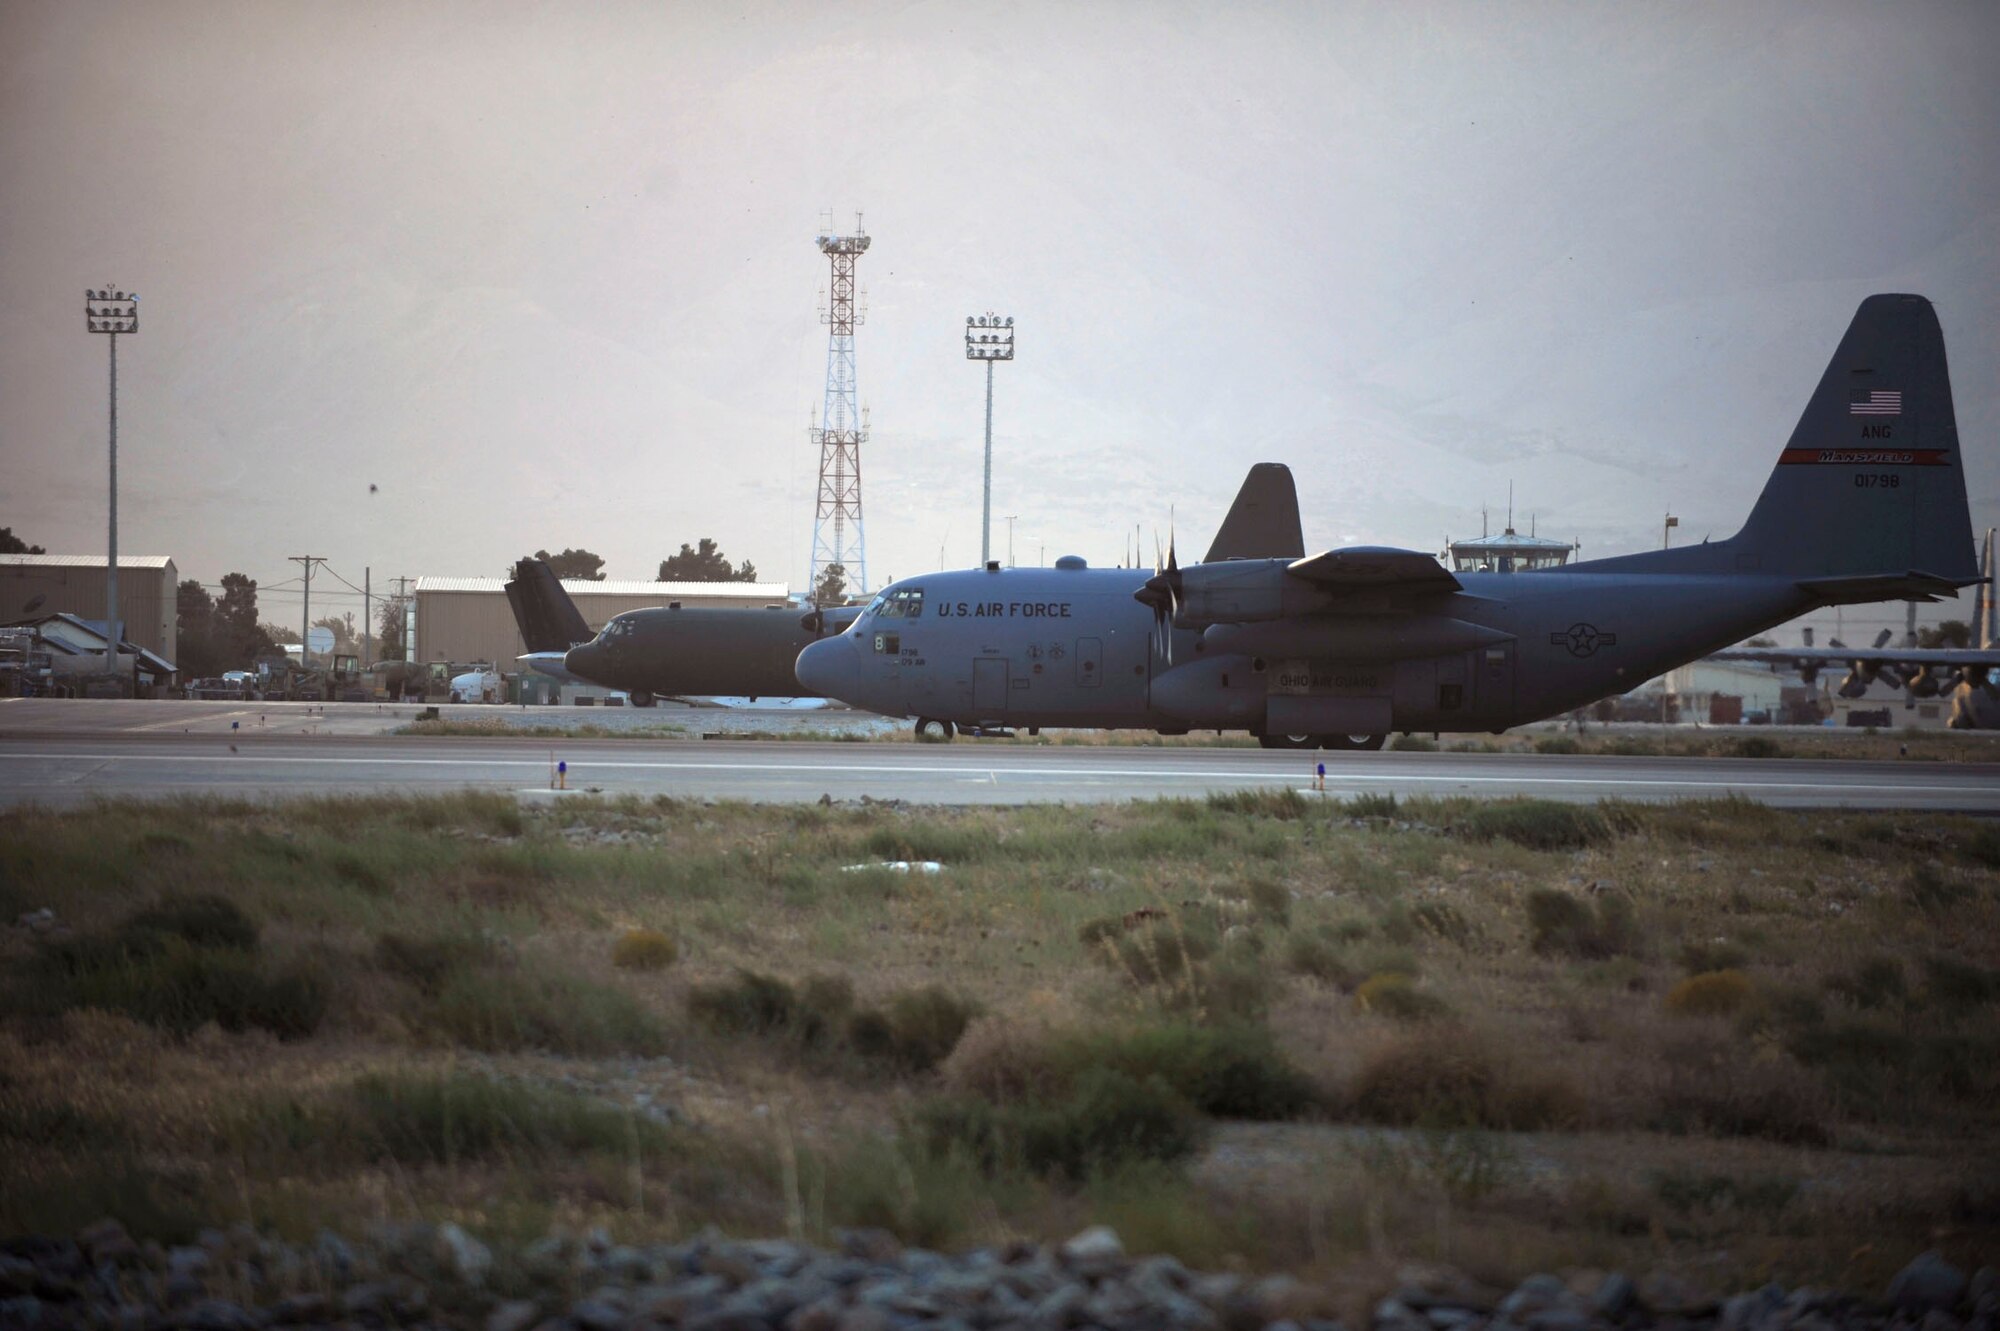 BAGRAM AIRIFELD, Afghanistan - The C-130 Hercules, like these pictured here, are the workhorses of airdrop missions here in Afghanistan for the 774th Expeditionary Airlift Squadron. (U.S. Air Force photo/Staff Sgt. J.G. Buzanowski)